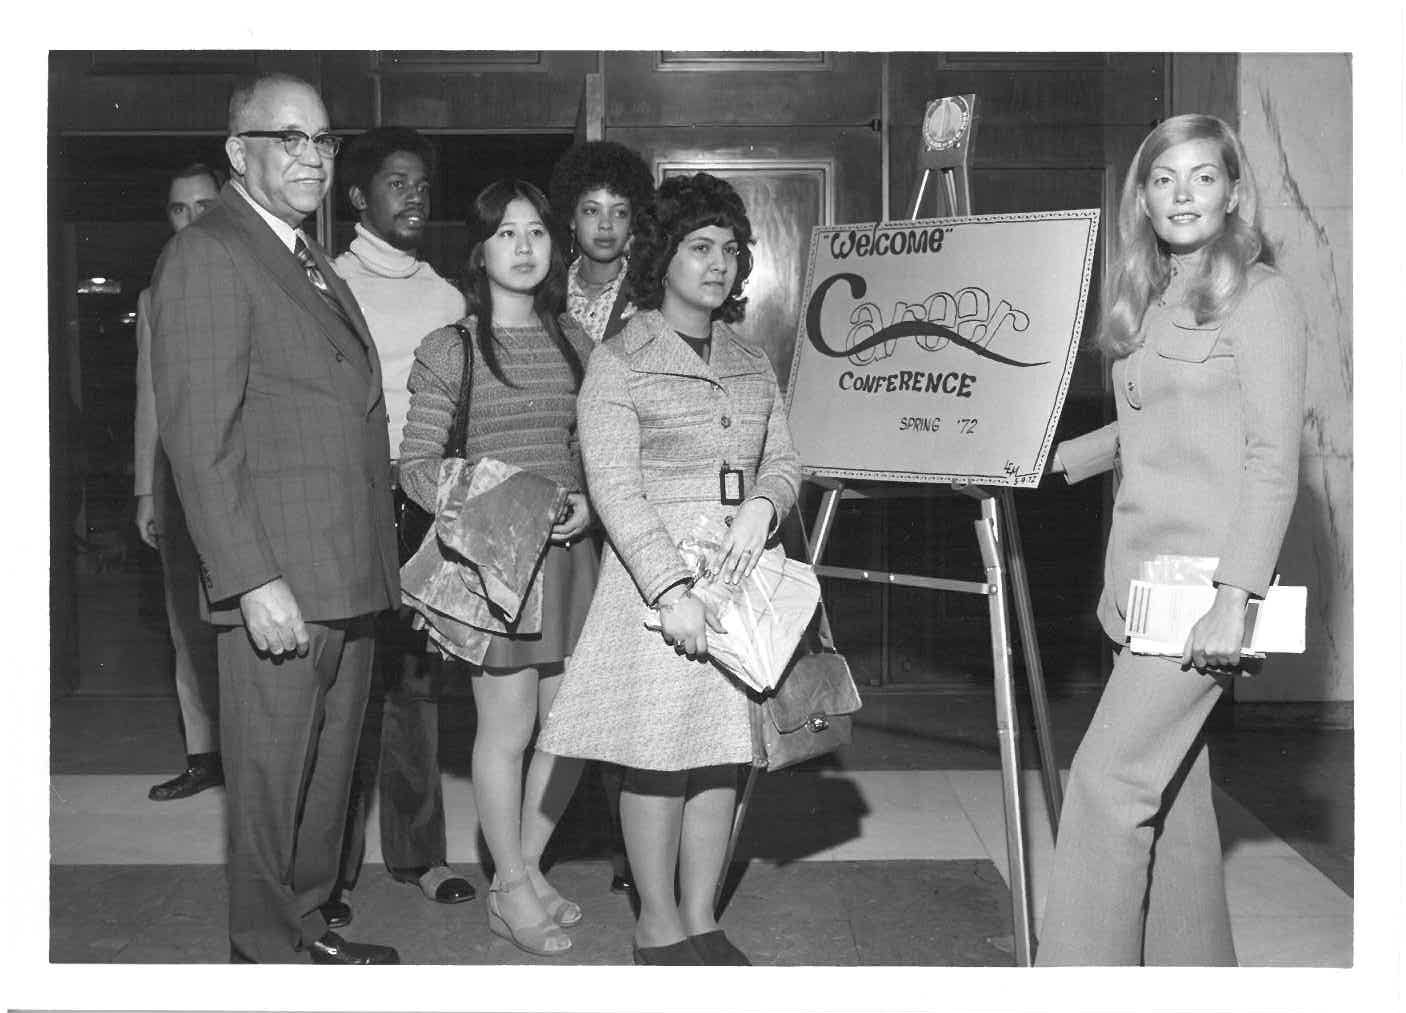 Career Conference, Spring 1972